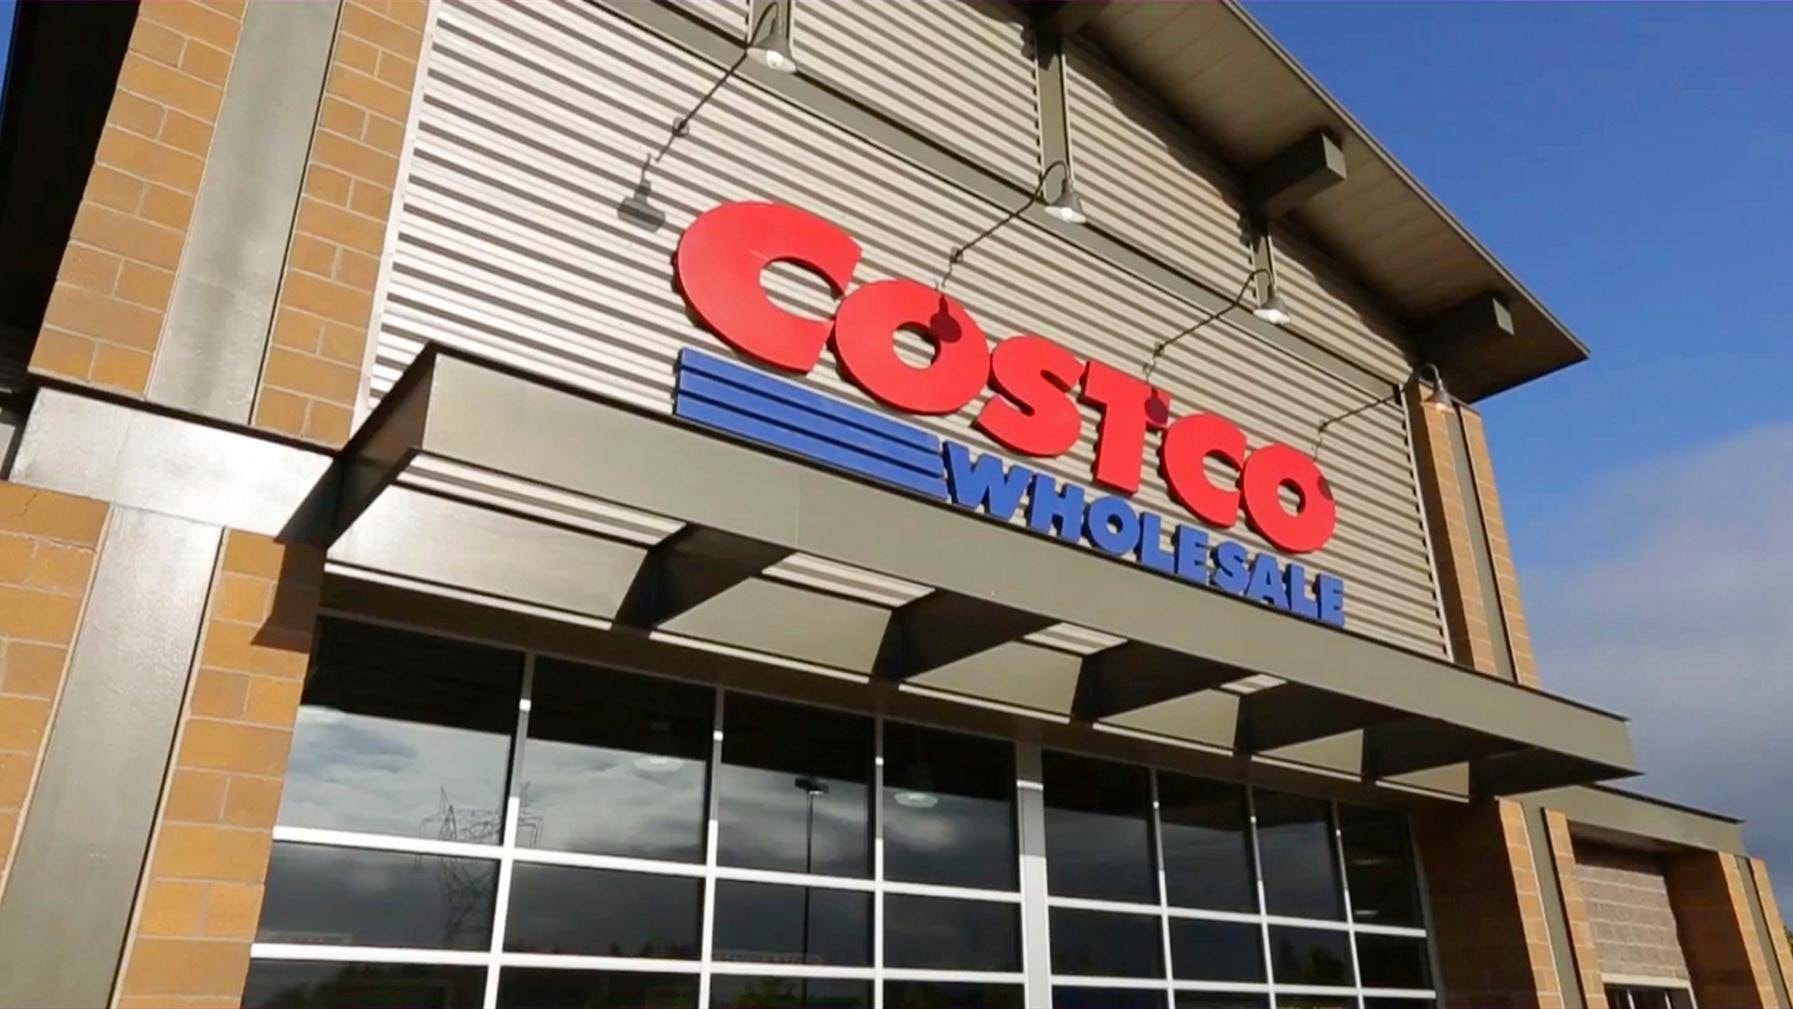 Costco Wholesale Club continues senior hours indefinitely due to increase in COVID-19 cases - USA TODAY